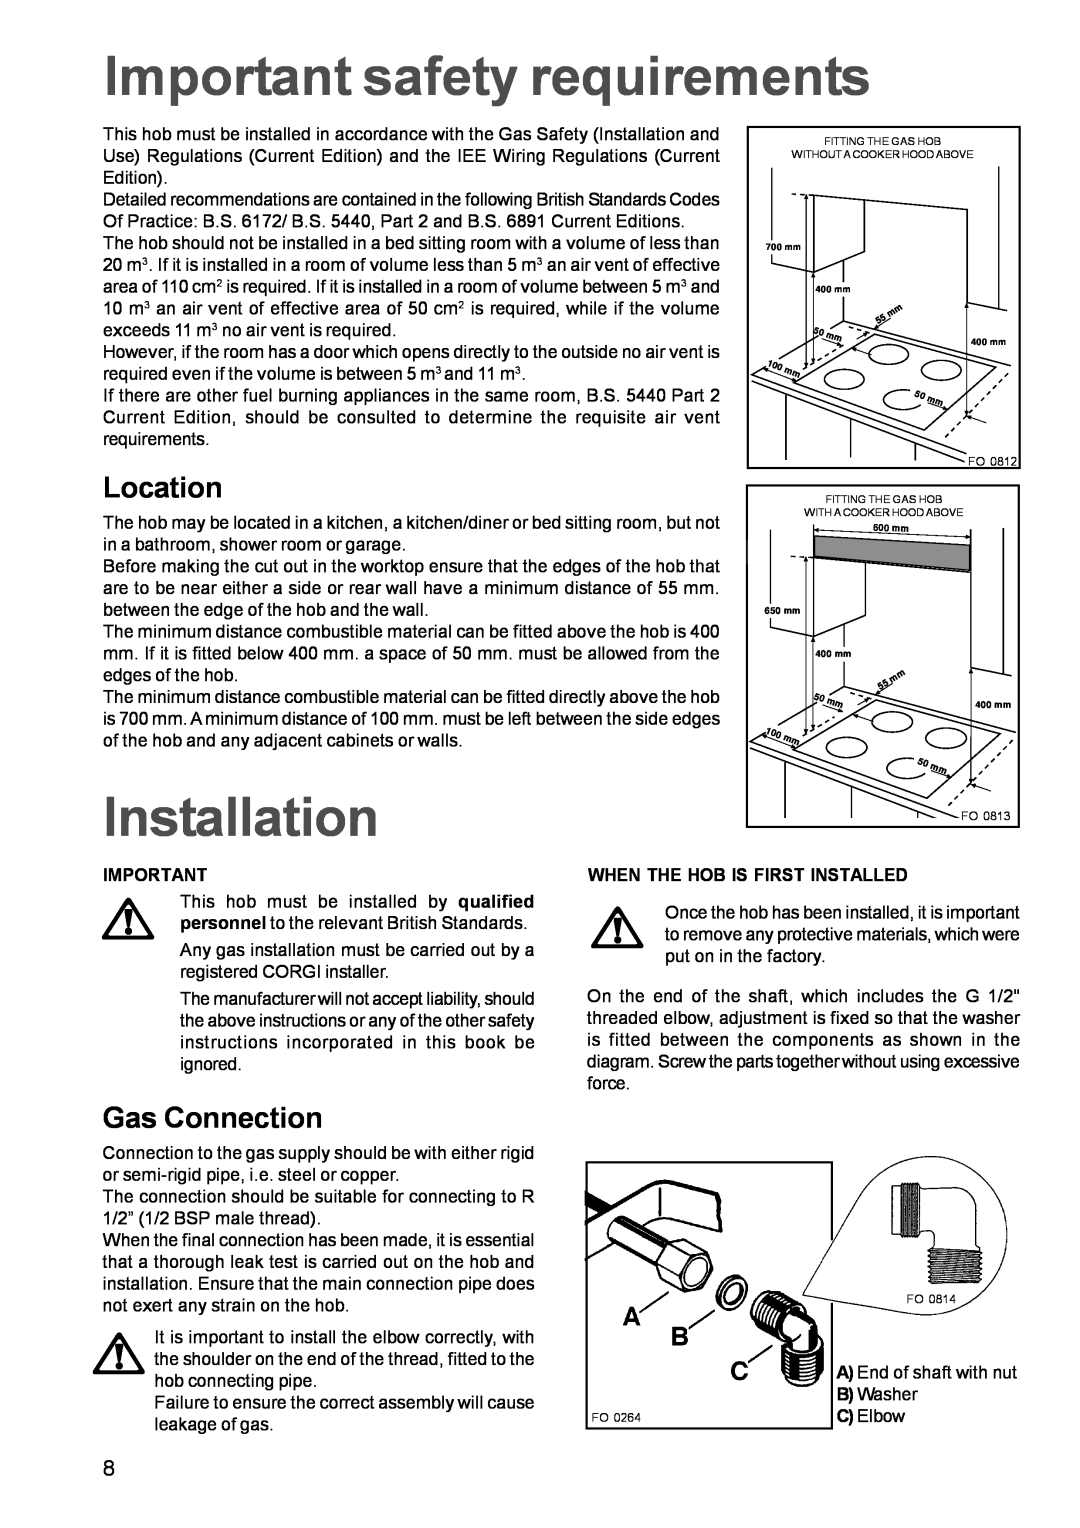 Electrolux EGG 689 manual Important safety requirements, Installation, Location, Gas Connection 